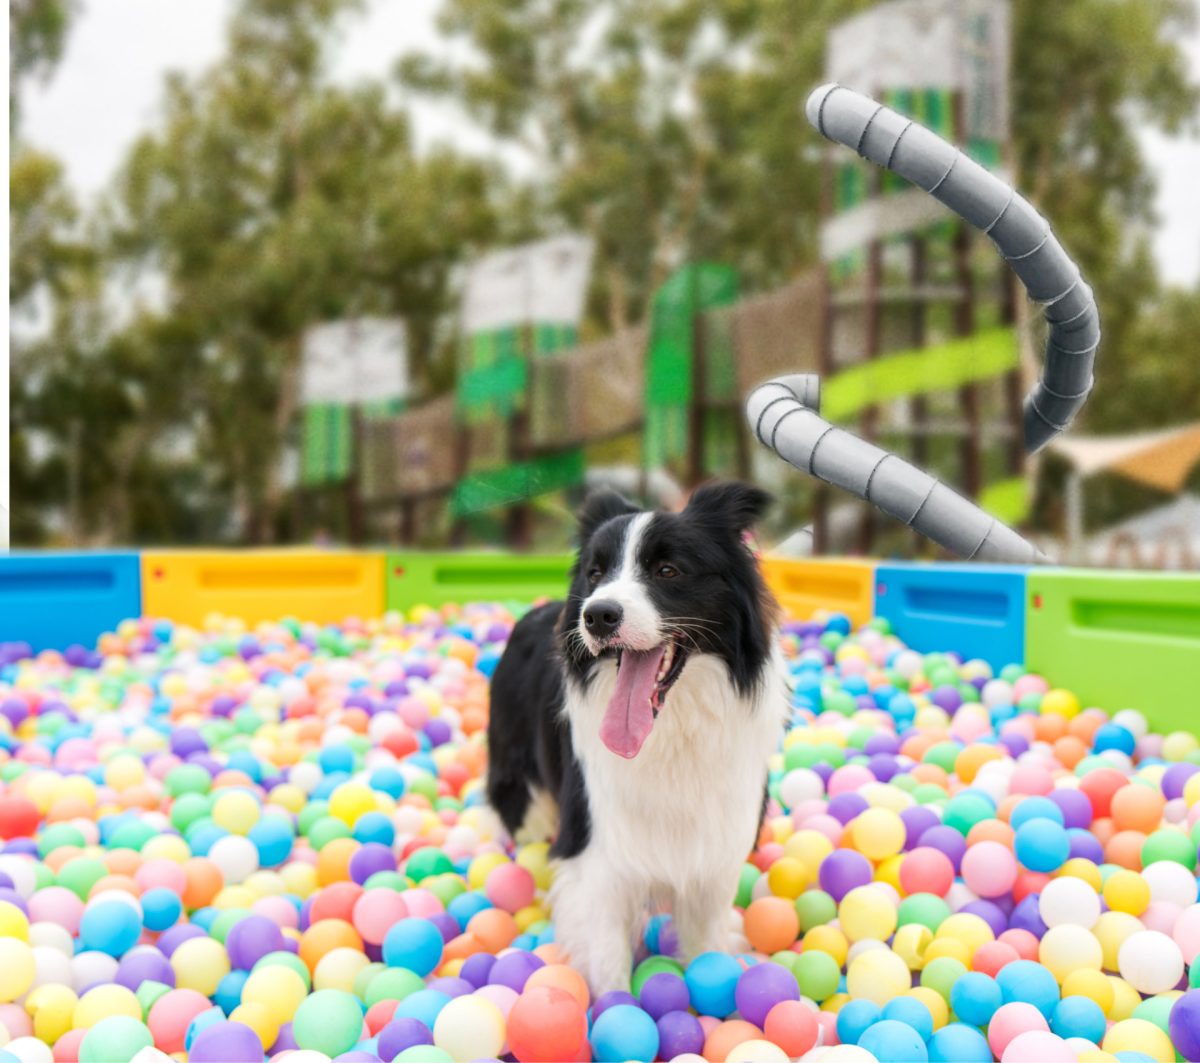 Wagga's dogs are invited to the region's biggest canine party.